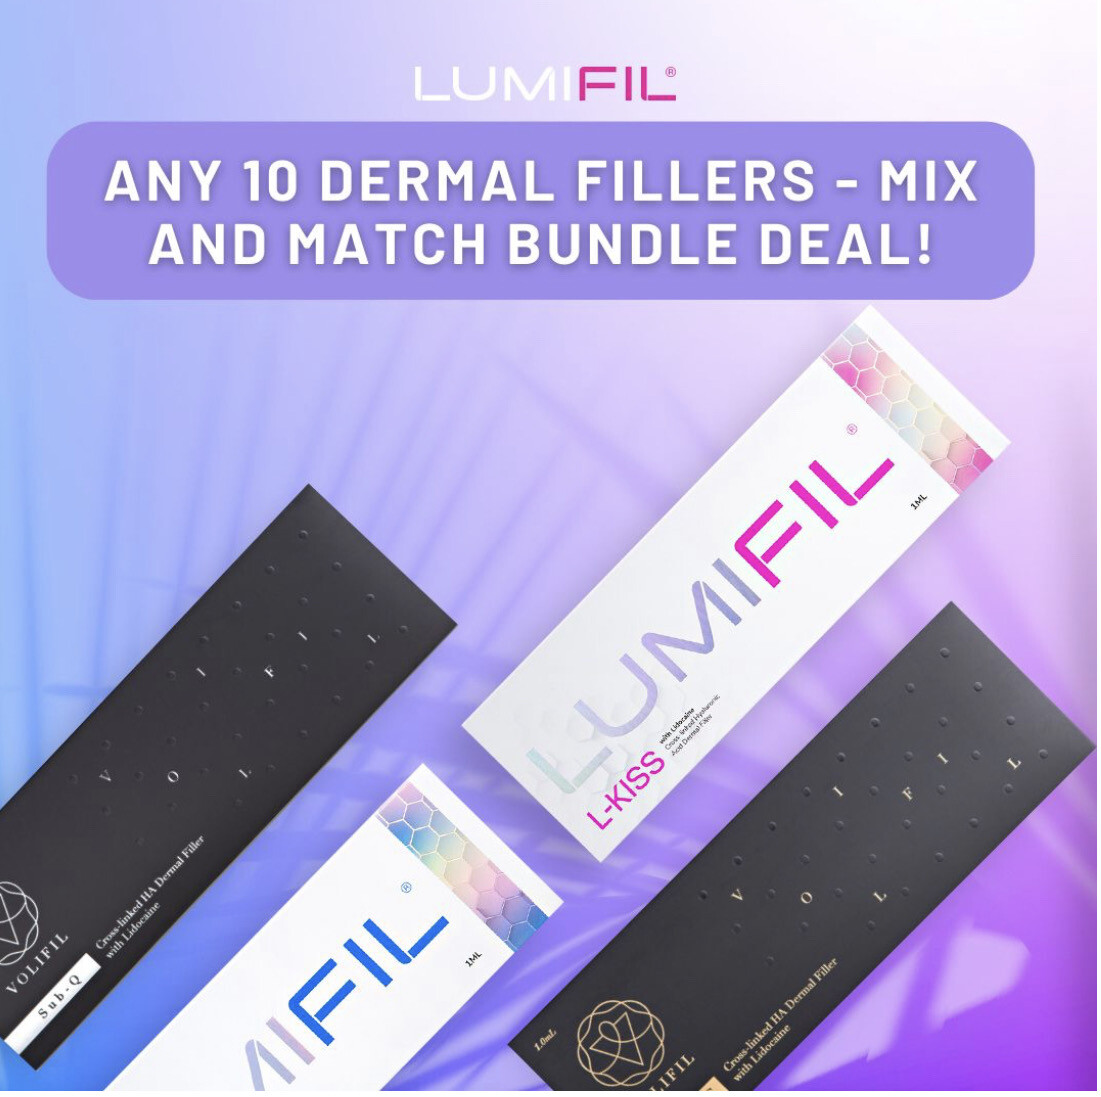 ANY 10 DERMAL FILLERS - MIX AND MATCH BUNDLE DEAL!